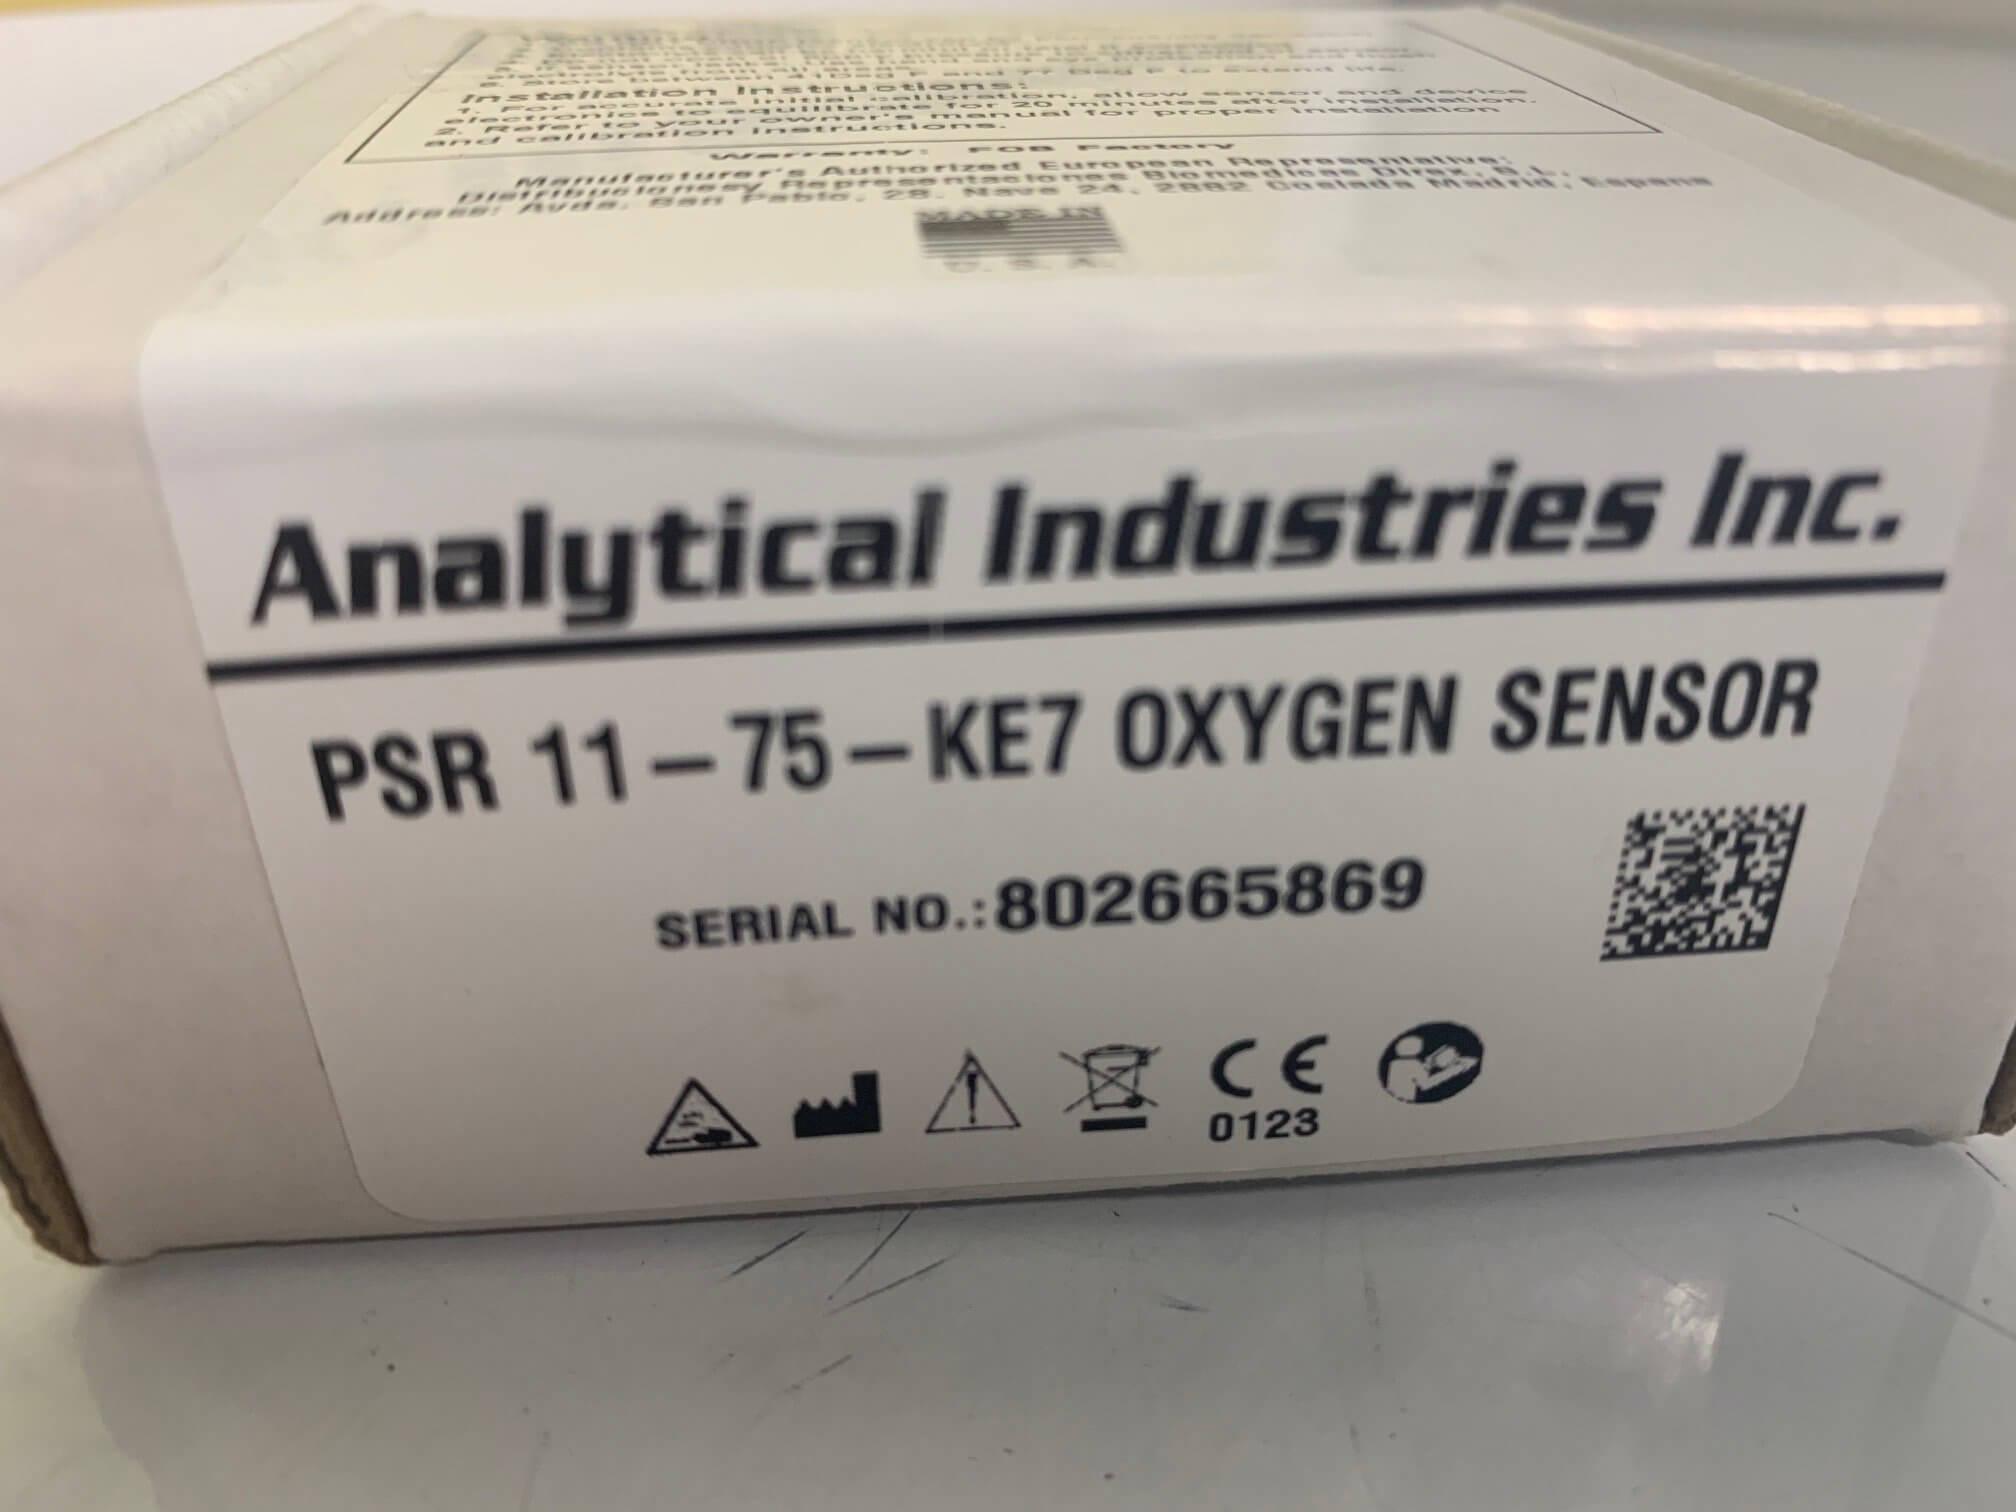 NEW Analytical Industries Oxygen Sensor PSR-11-75-KE7 for Newport HT70 with  Free Shipping and Warranty